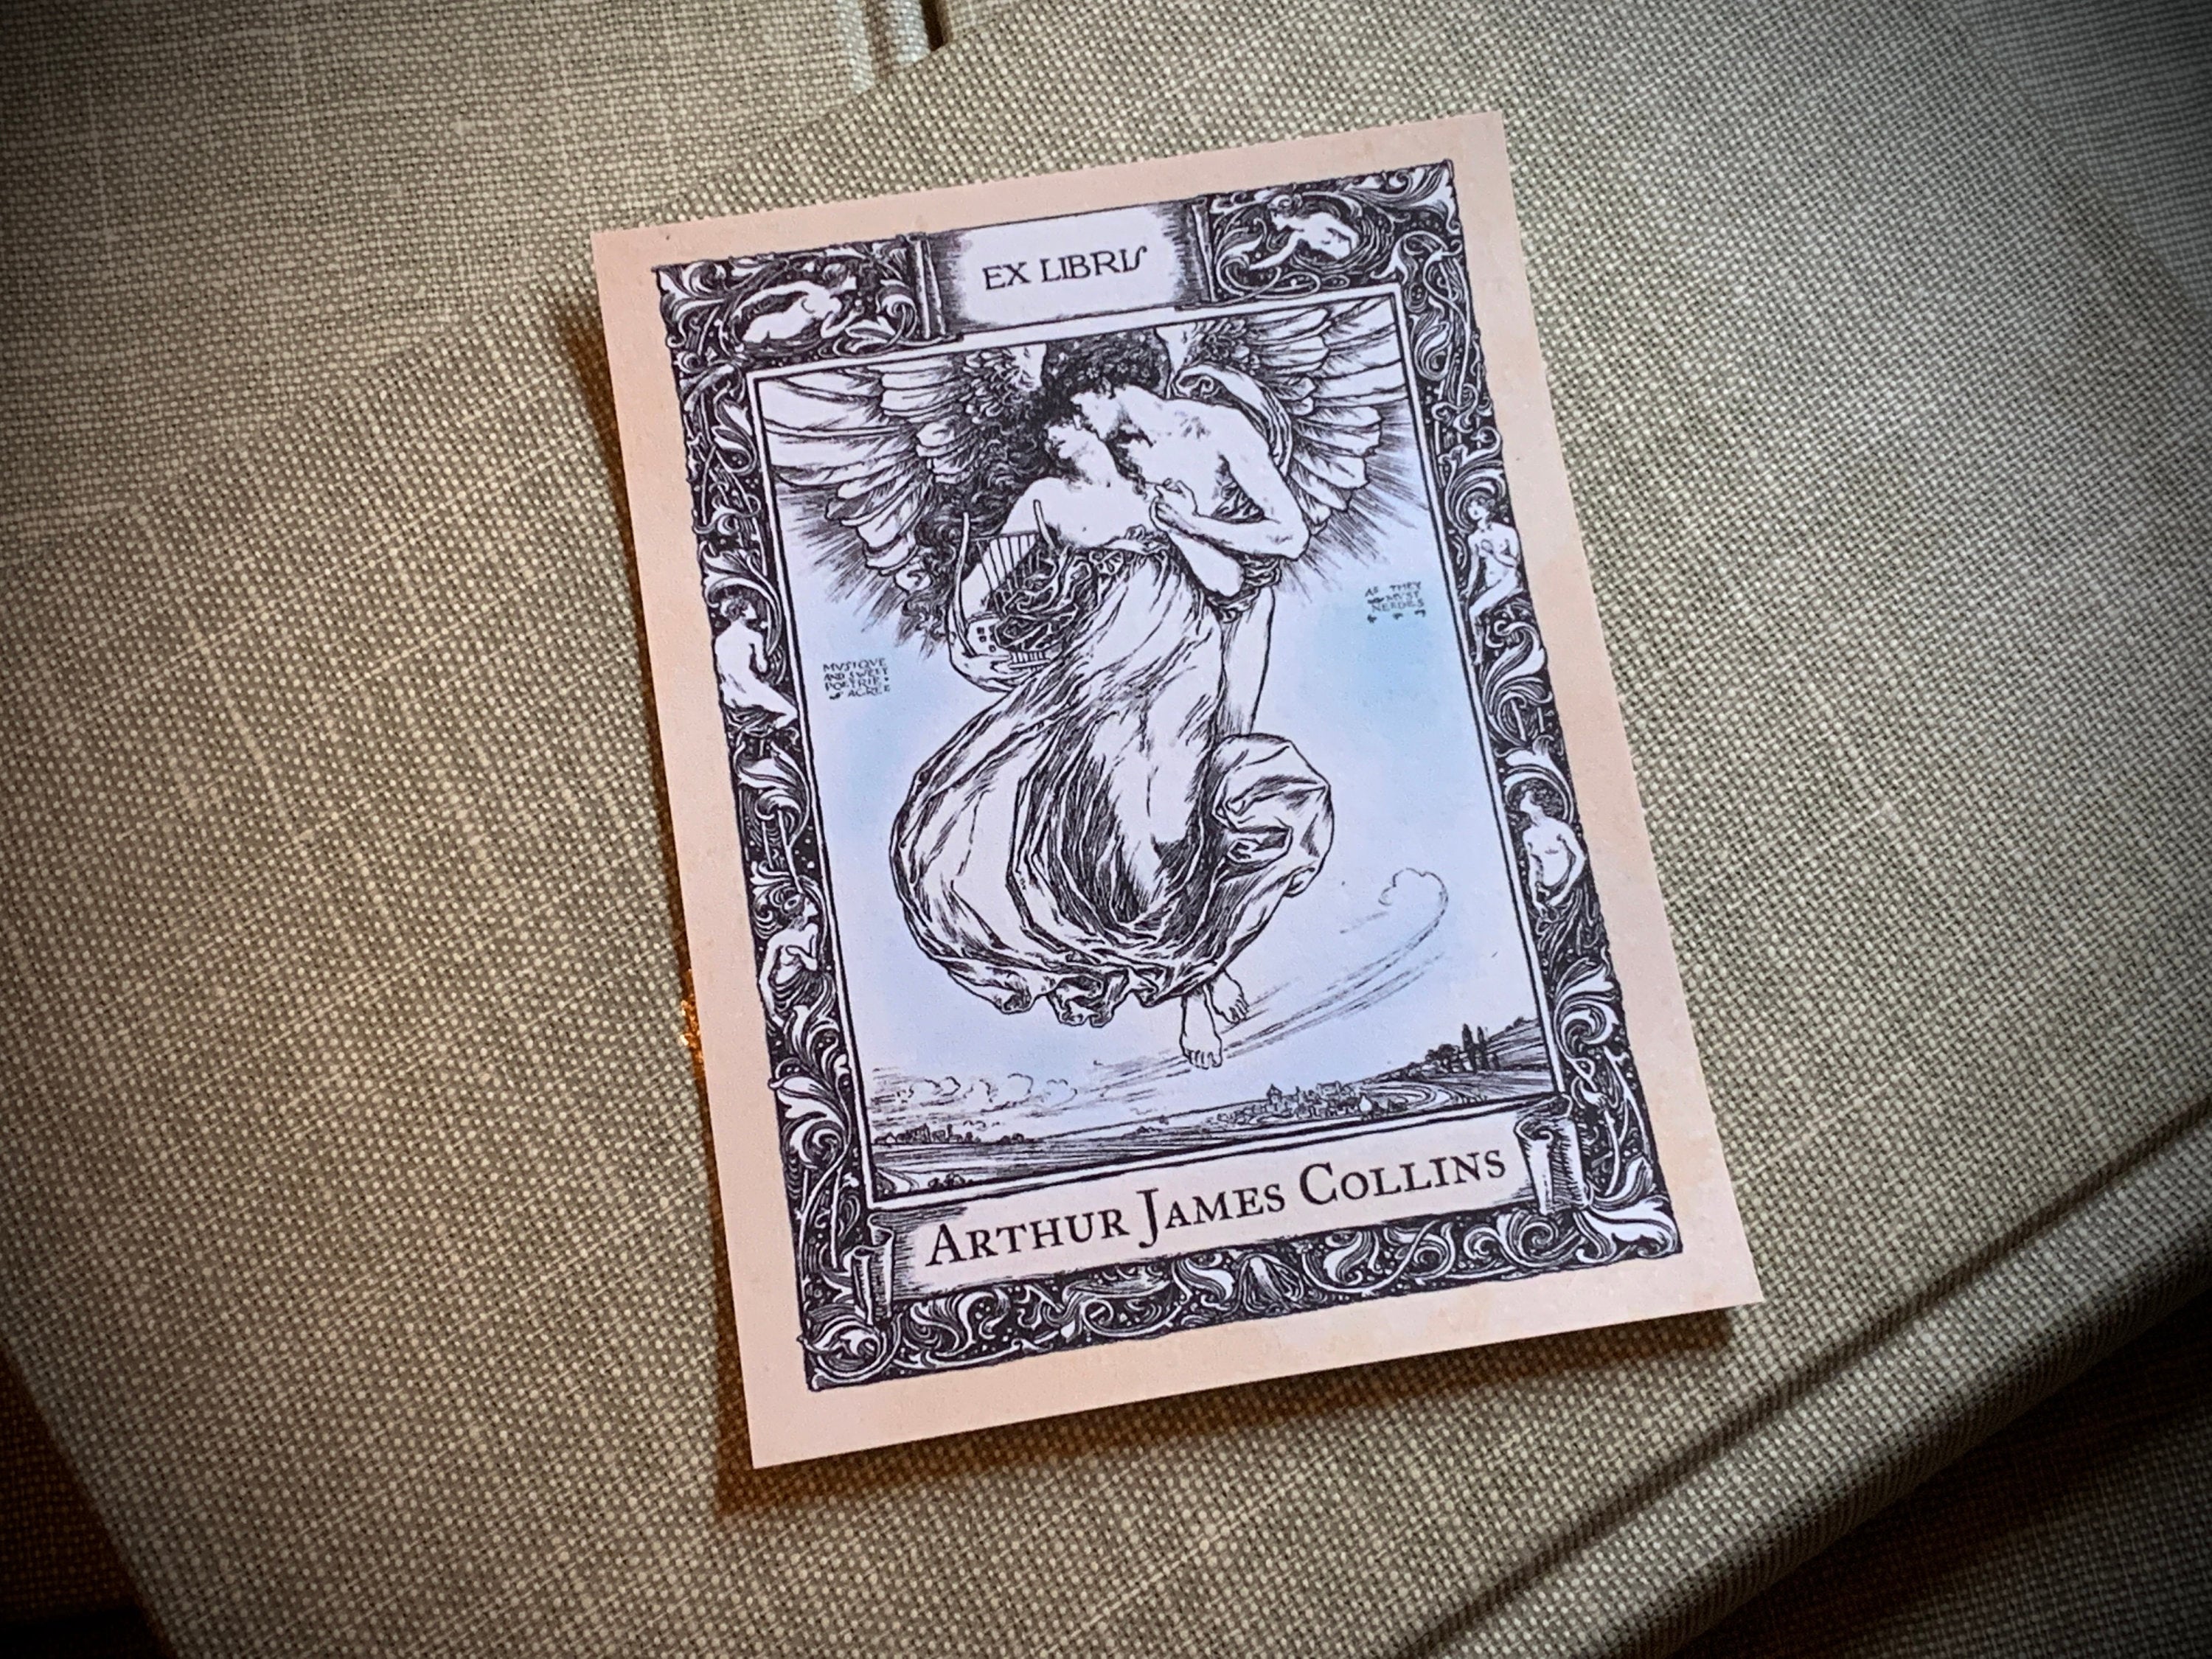 Cupid and Psyche, Personalized Ex-Libris Bookplates, Crafted on Traditional Gummed Paper, 3in x 4in, Set of 30